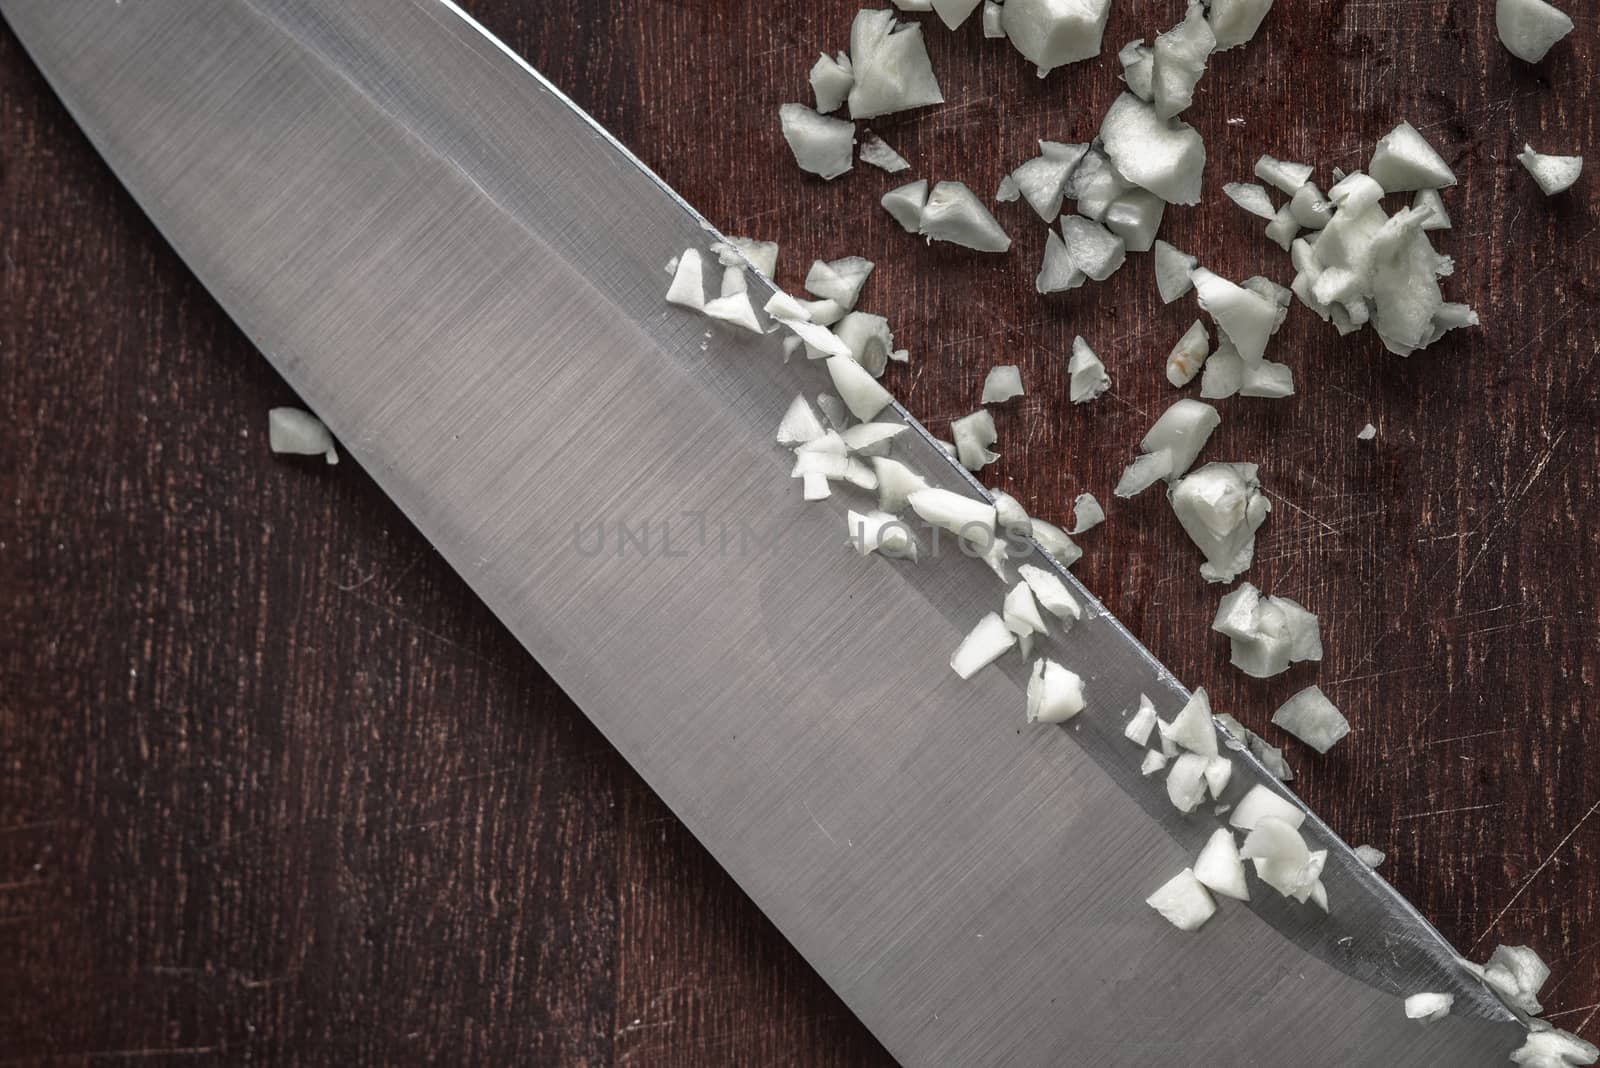 Chopped onion with knife on the wooden board top view